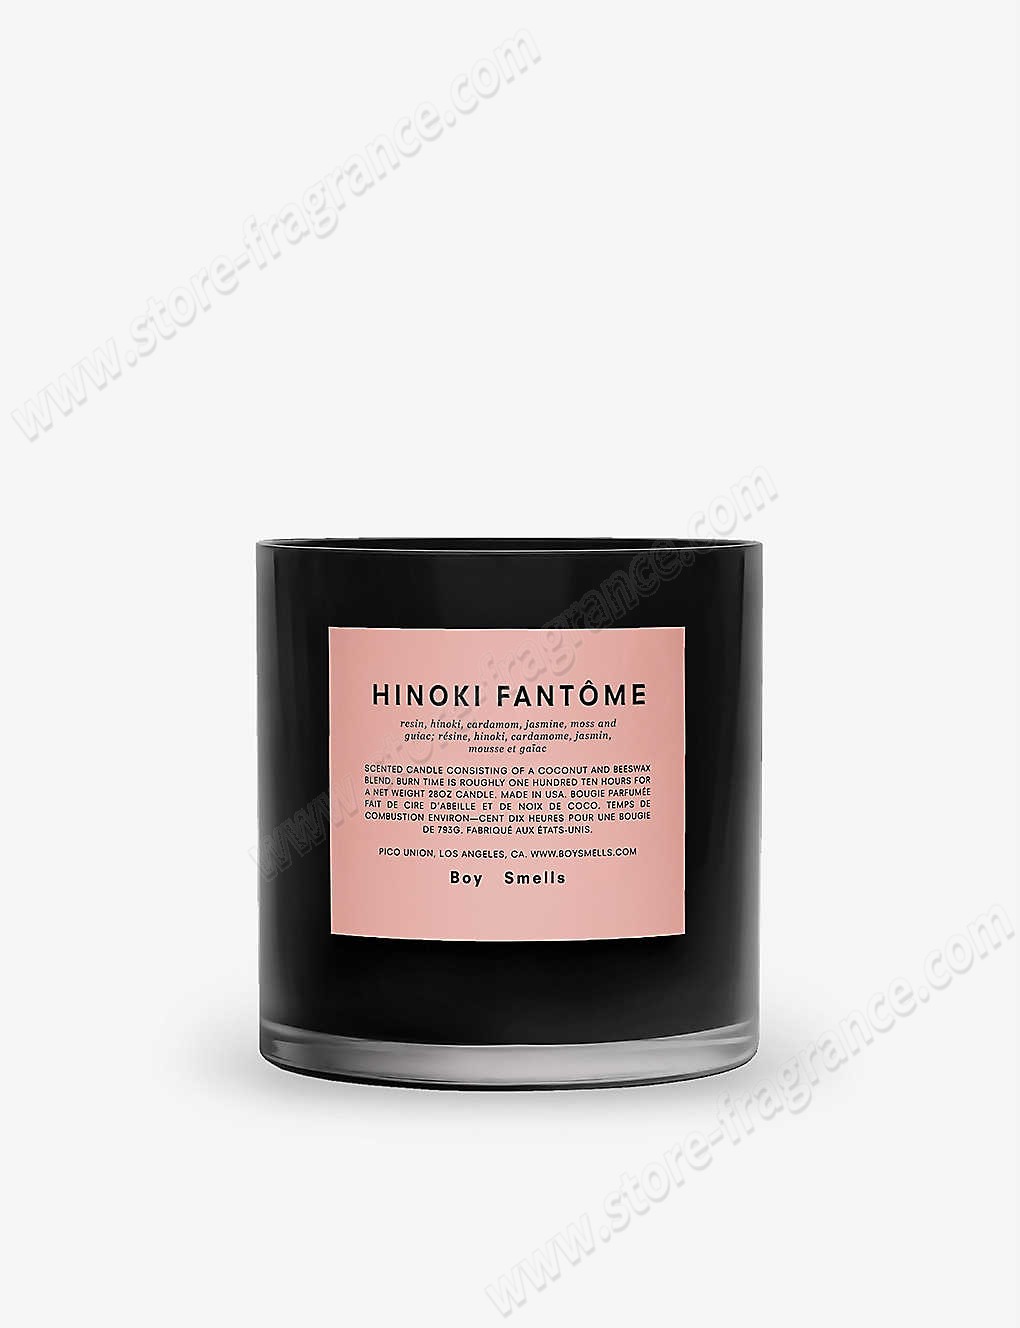 BOY SMELLS/Hinoki Fantôme scented candle 793g ✿ Discount Store - -0